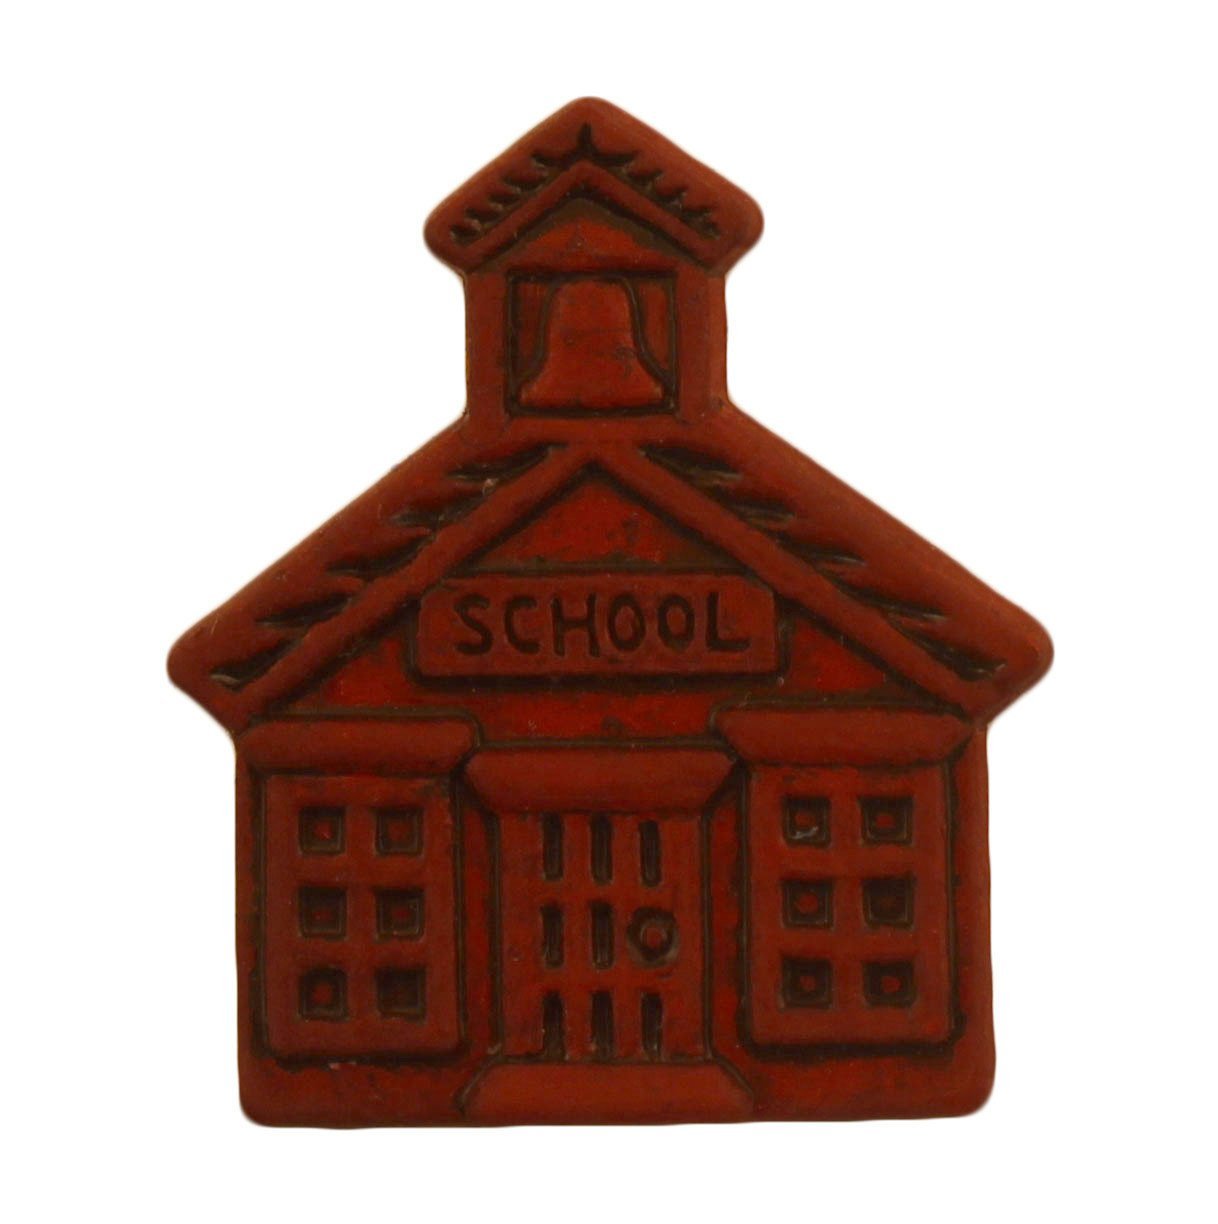 School House - Buttons Galore and More